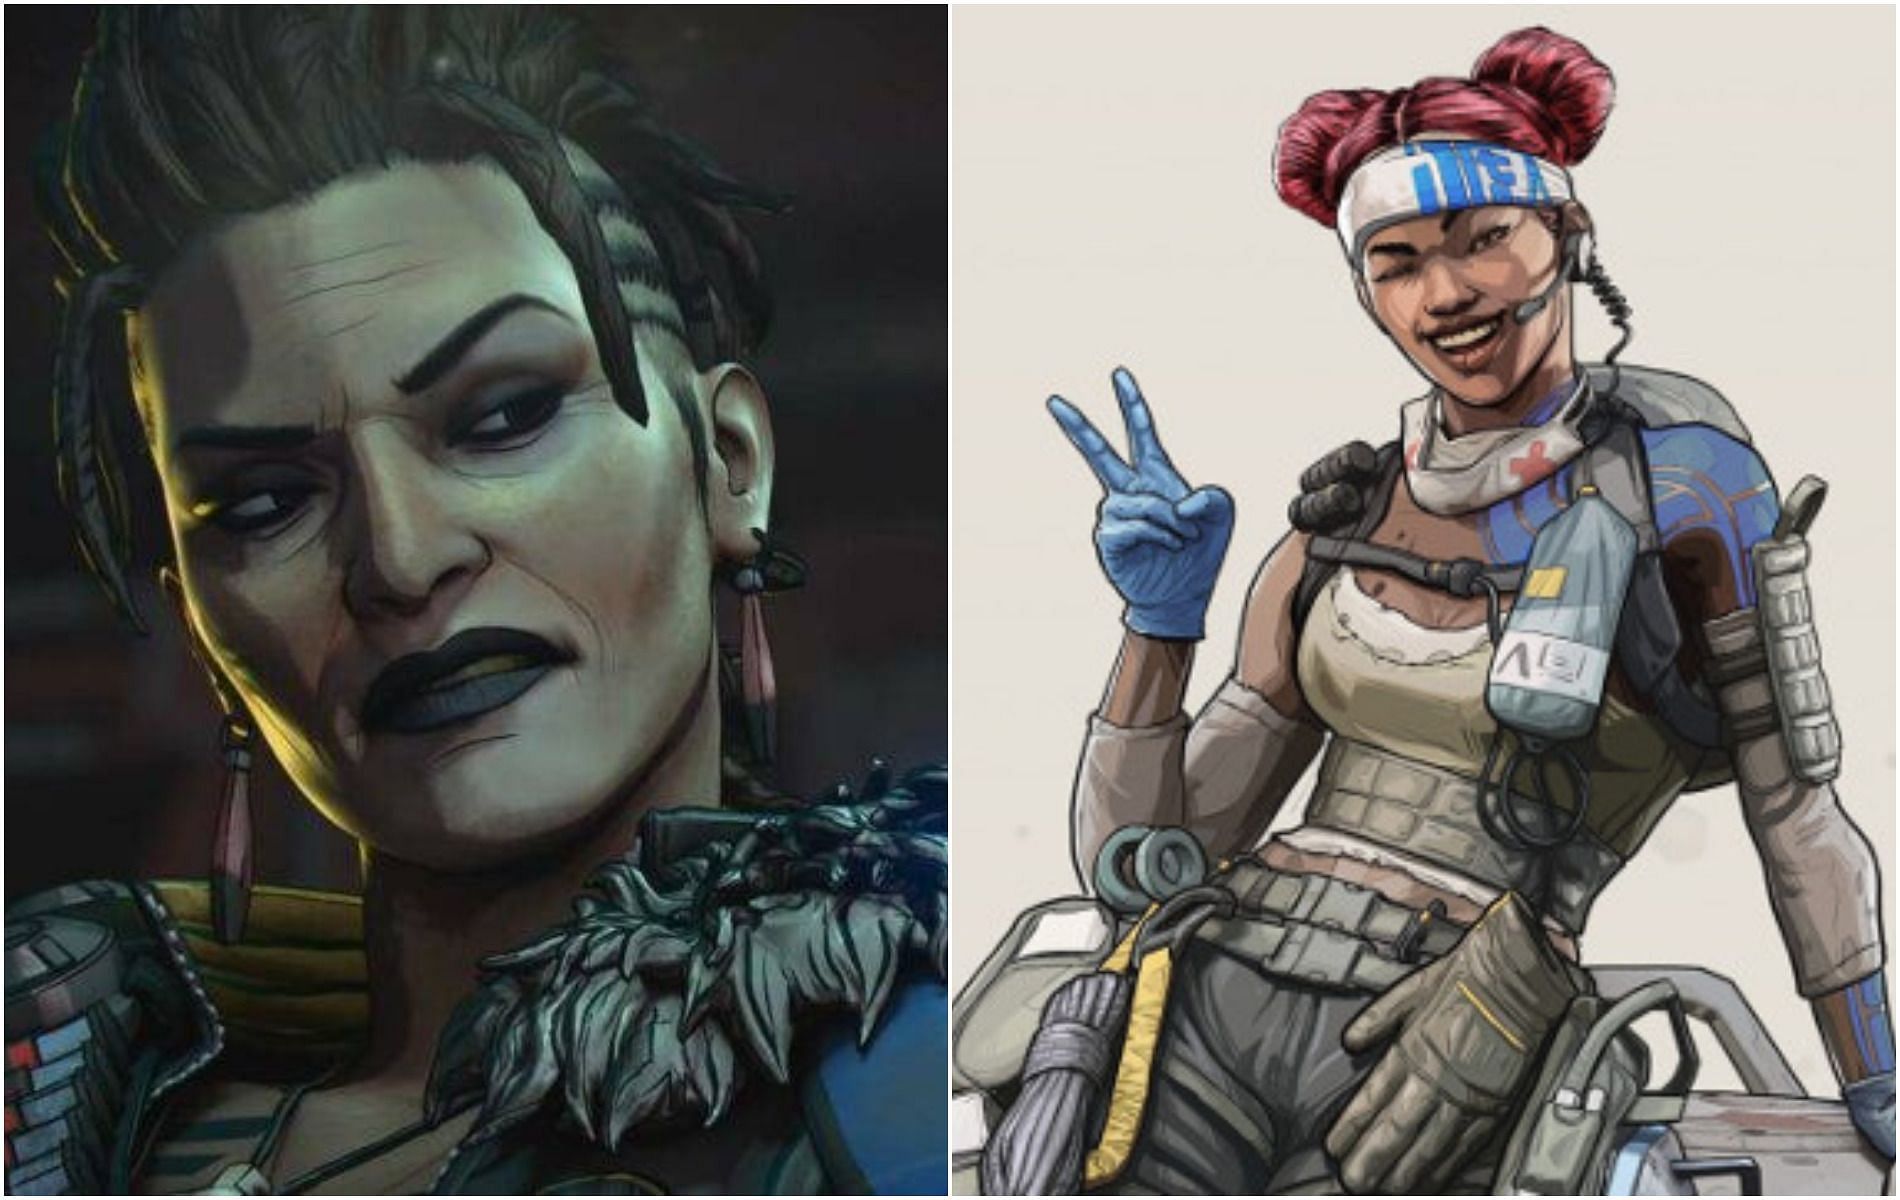 Season 12 Defiance introduces Mad Maggie to the roster (Image via Apex Legends)